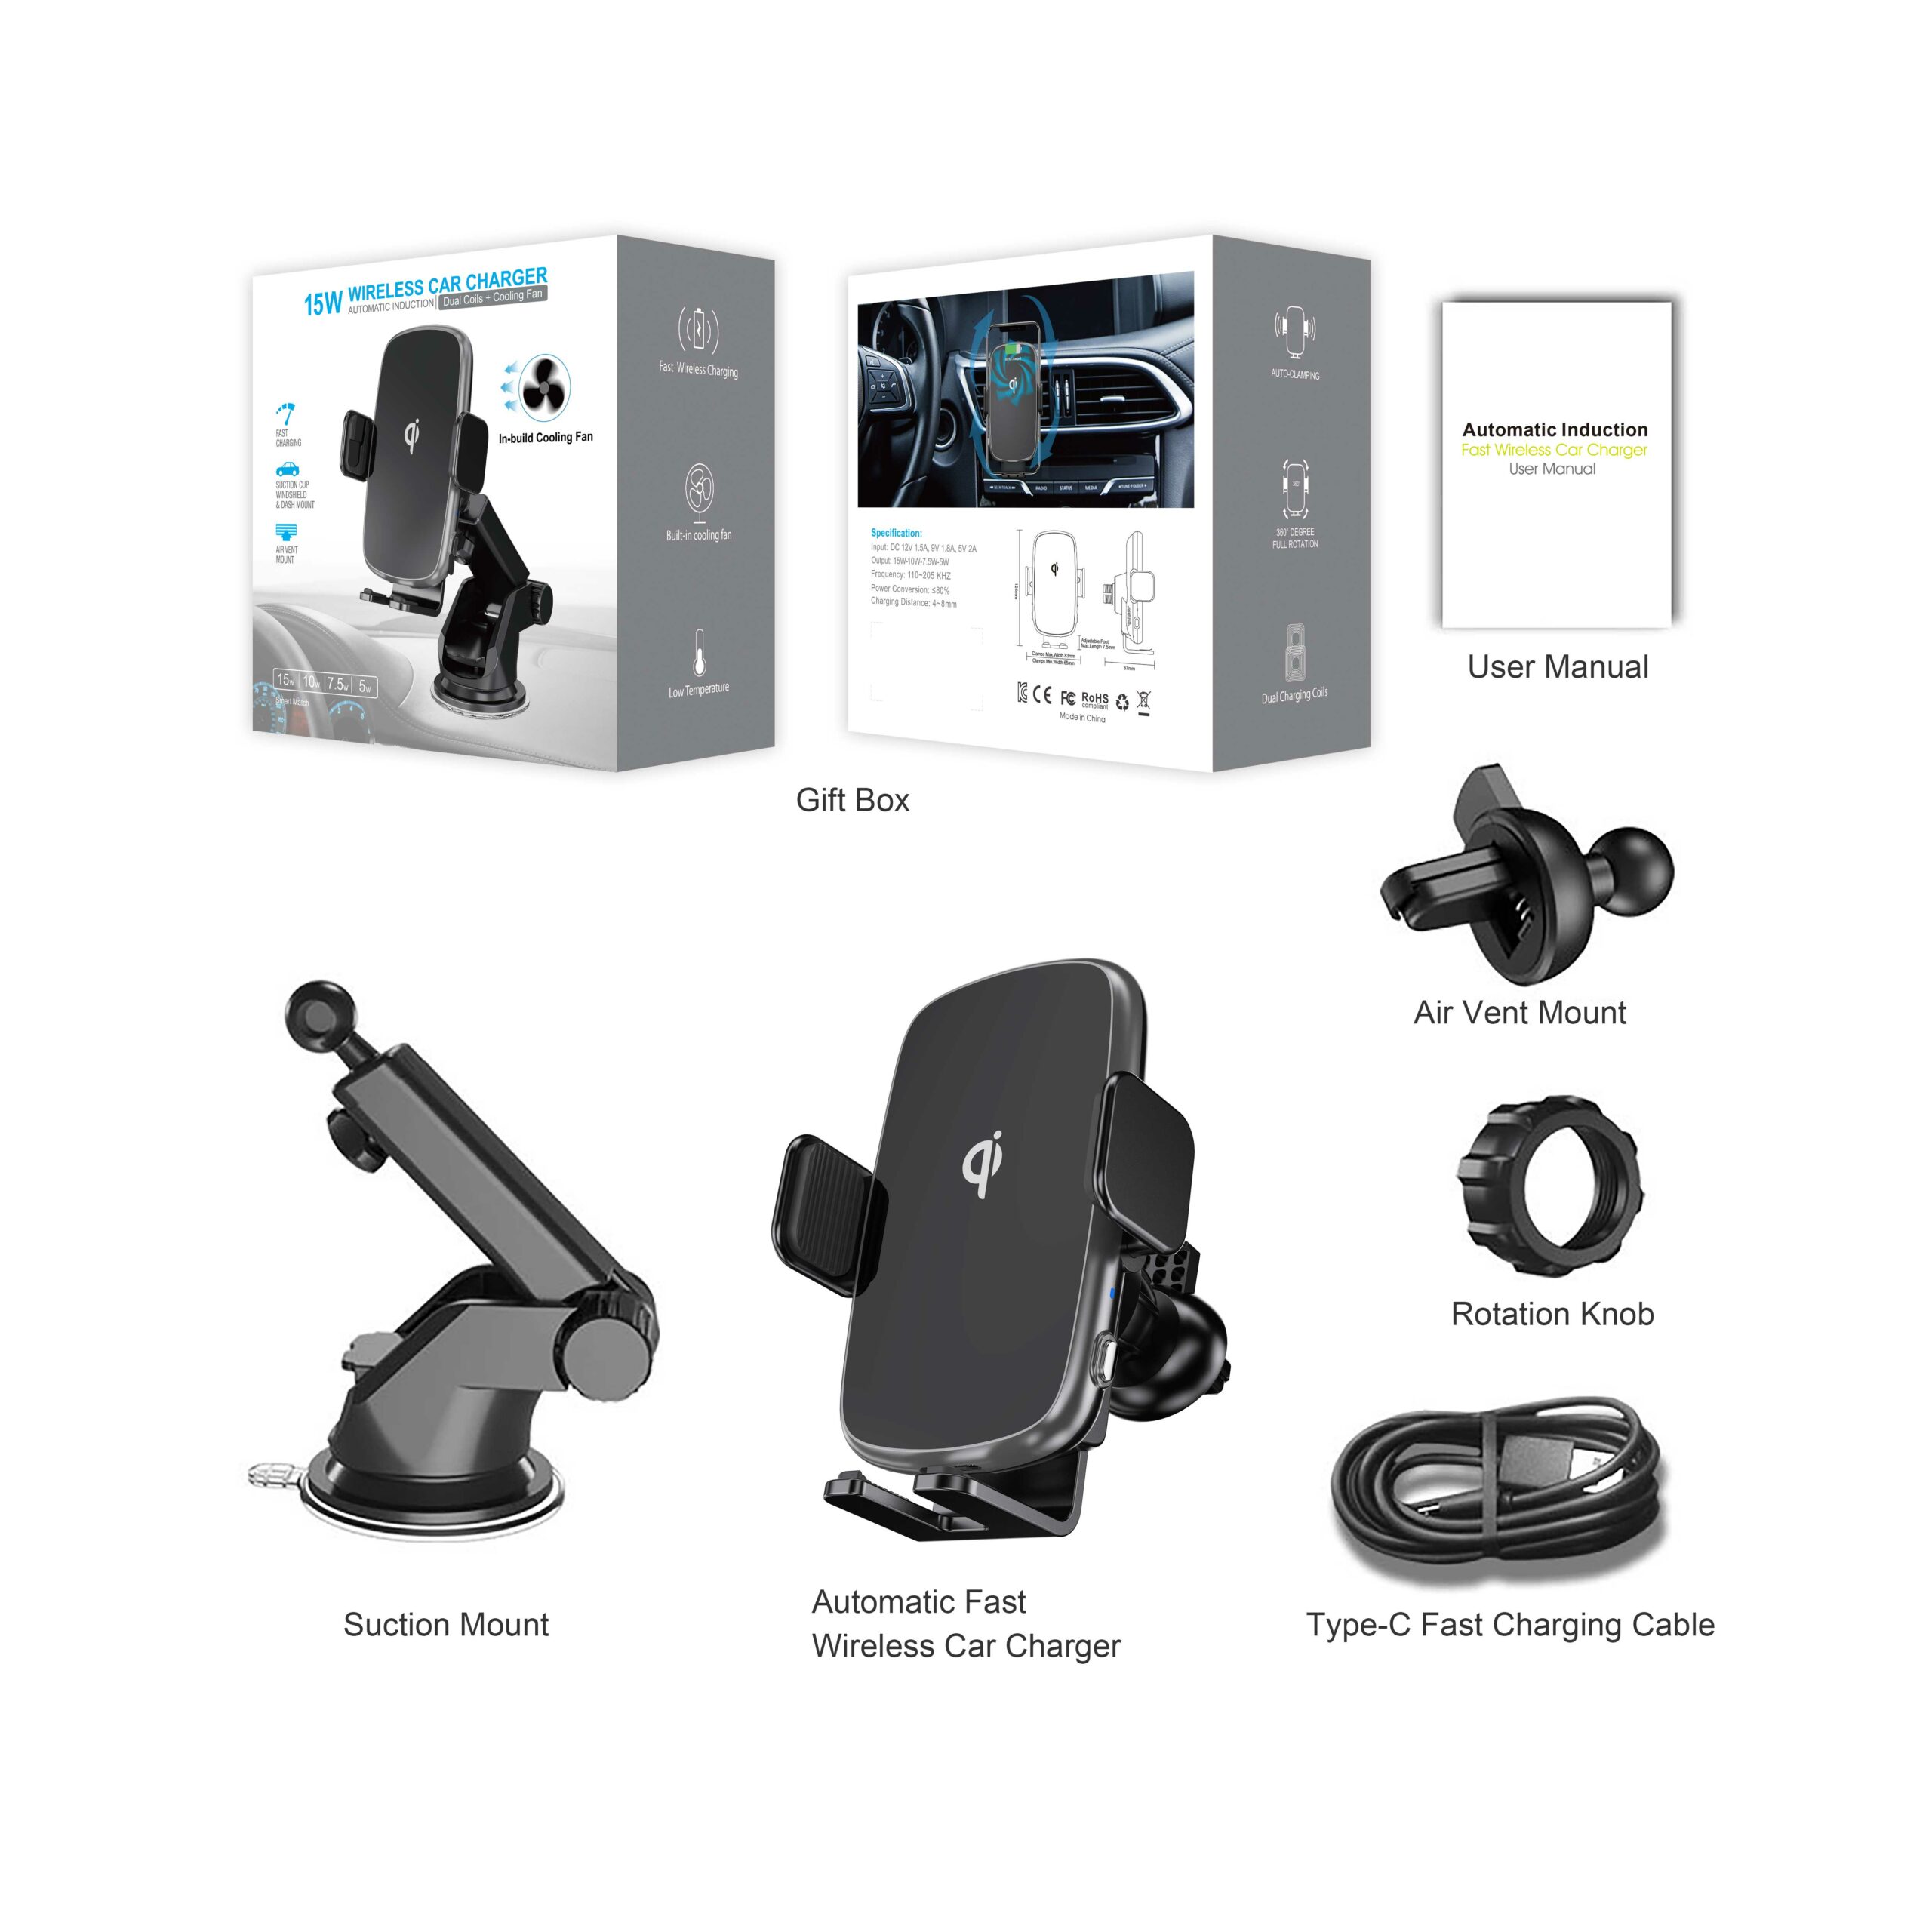 WT C29F Samsung wireless car charger details 1 scaled